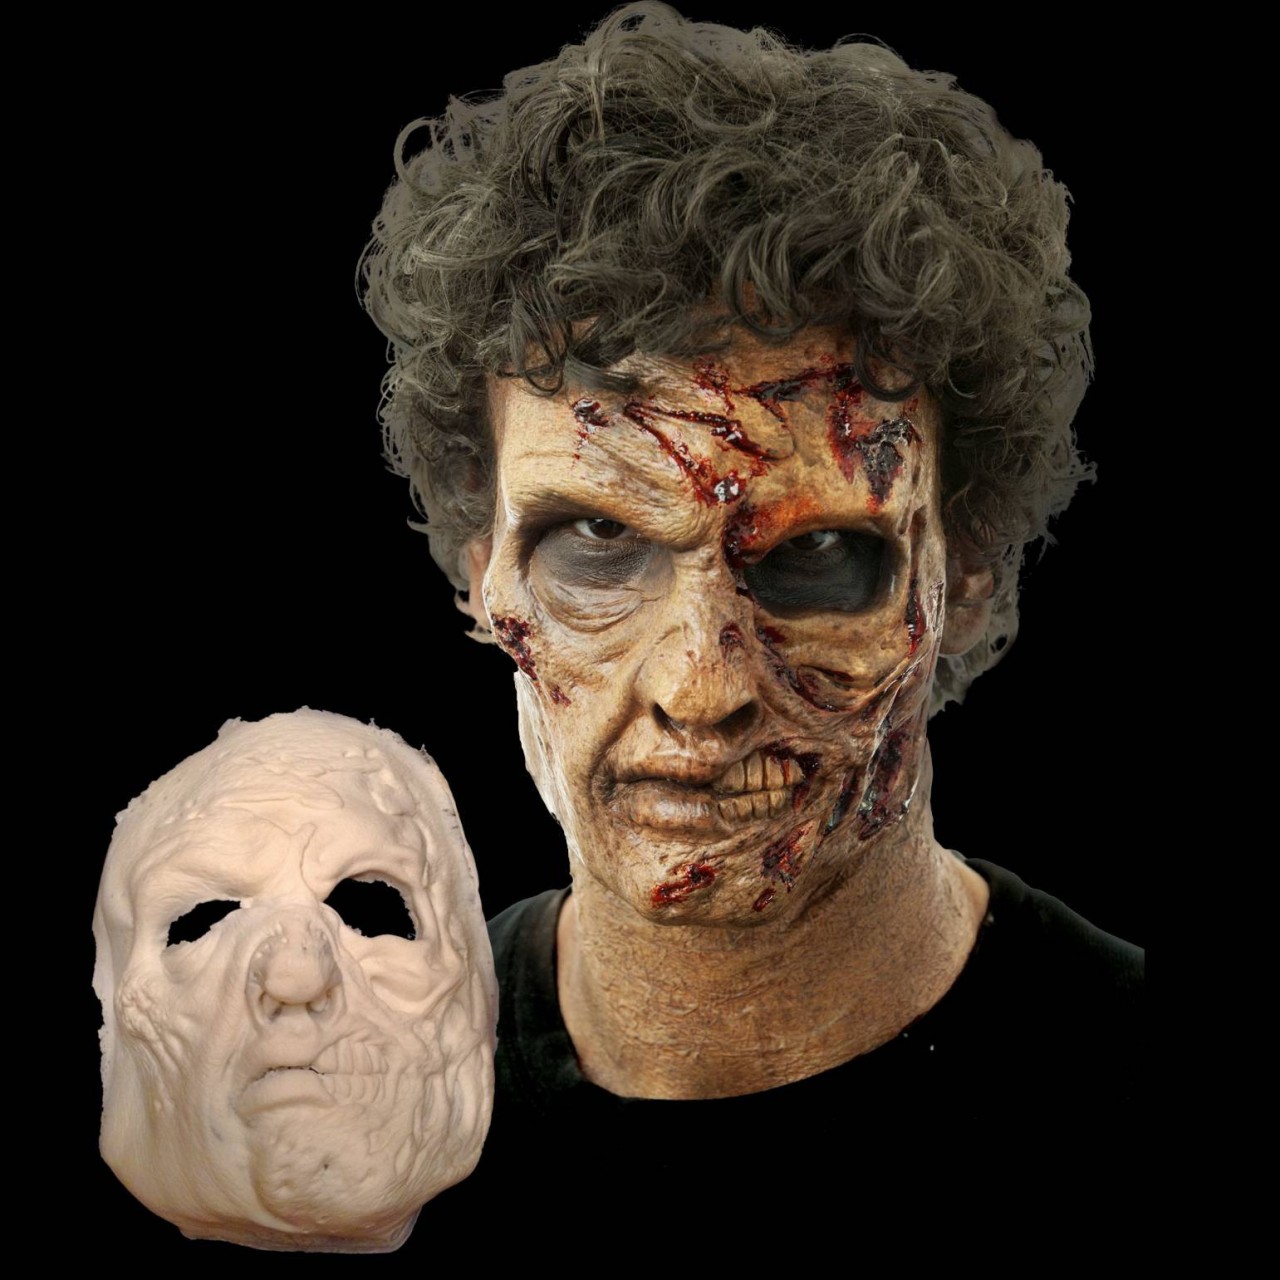 Exhumed Foam Latex Zombie Mask - Costumes